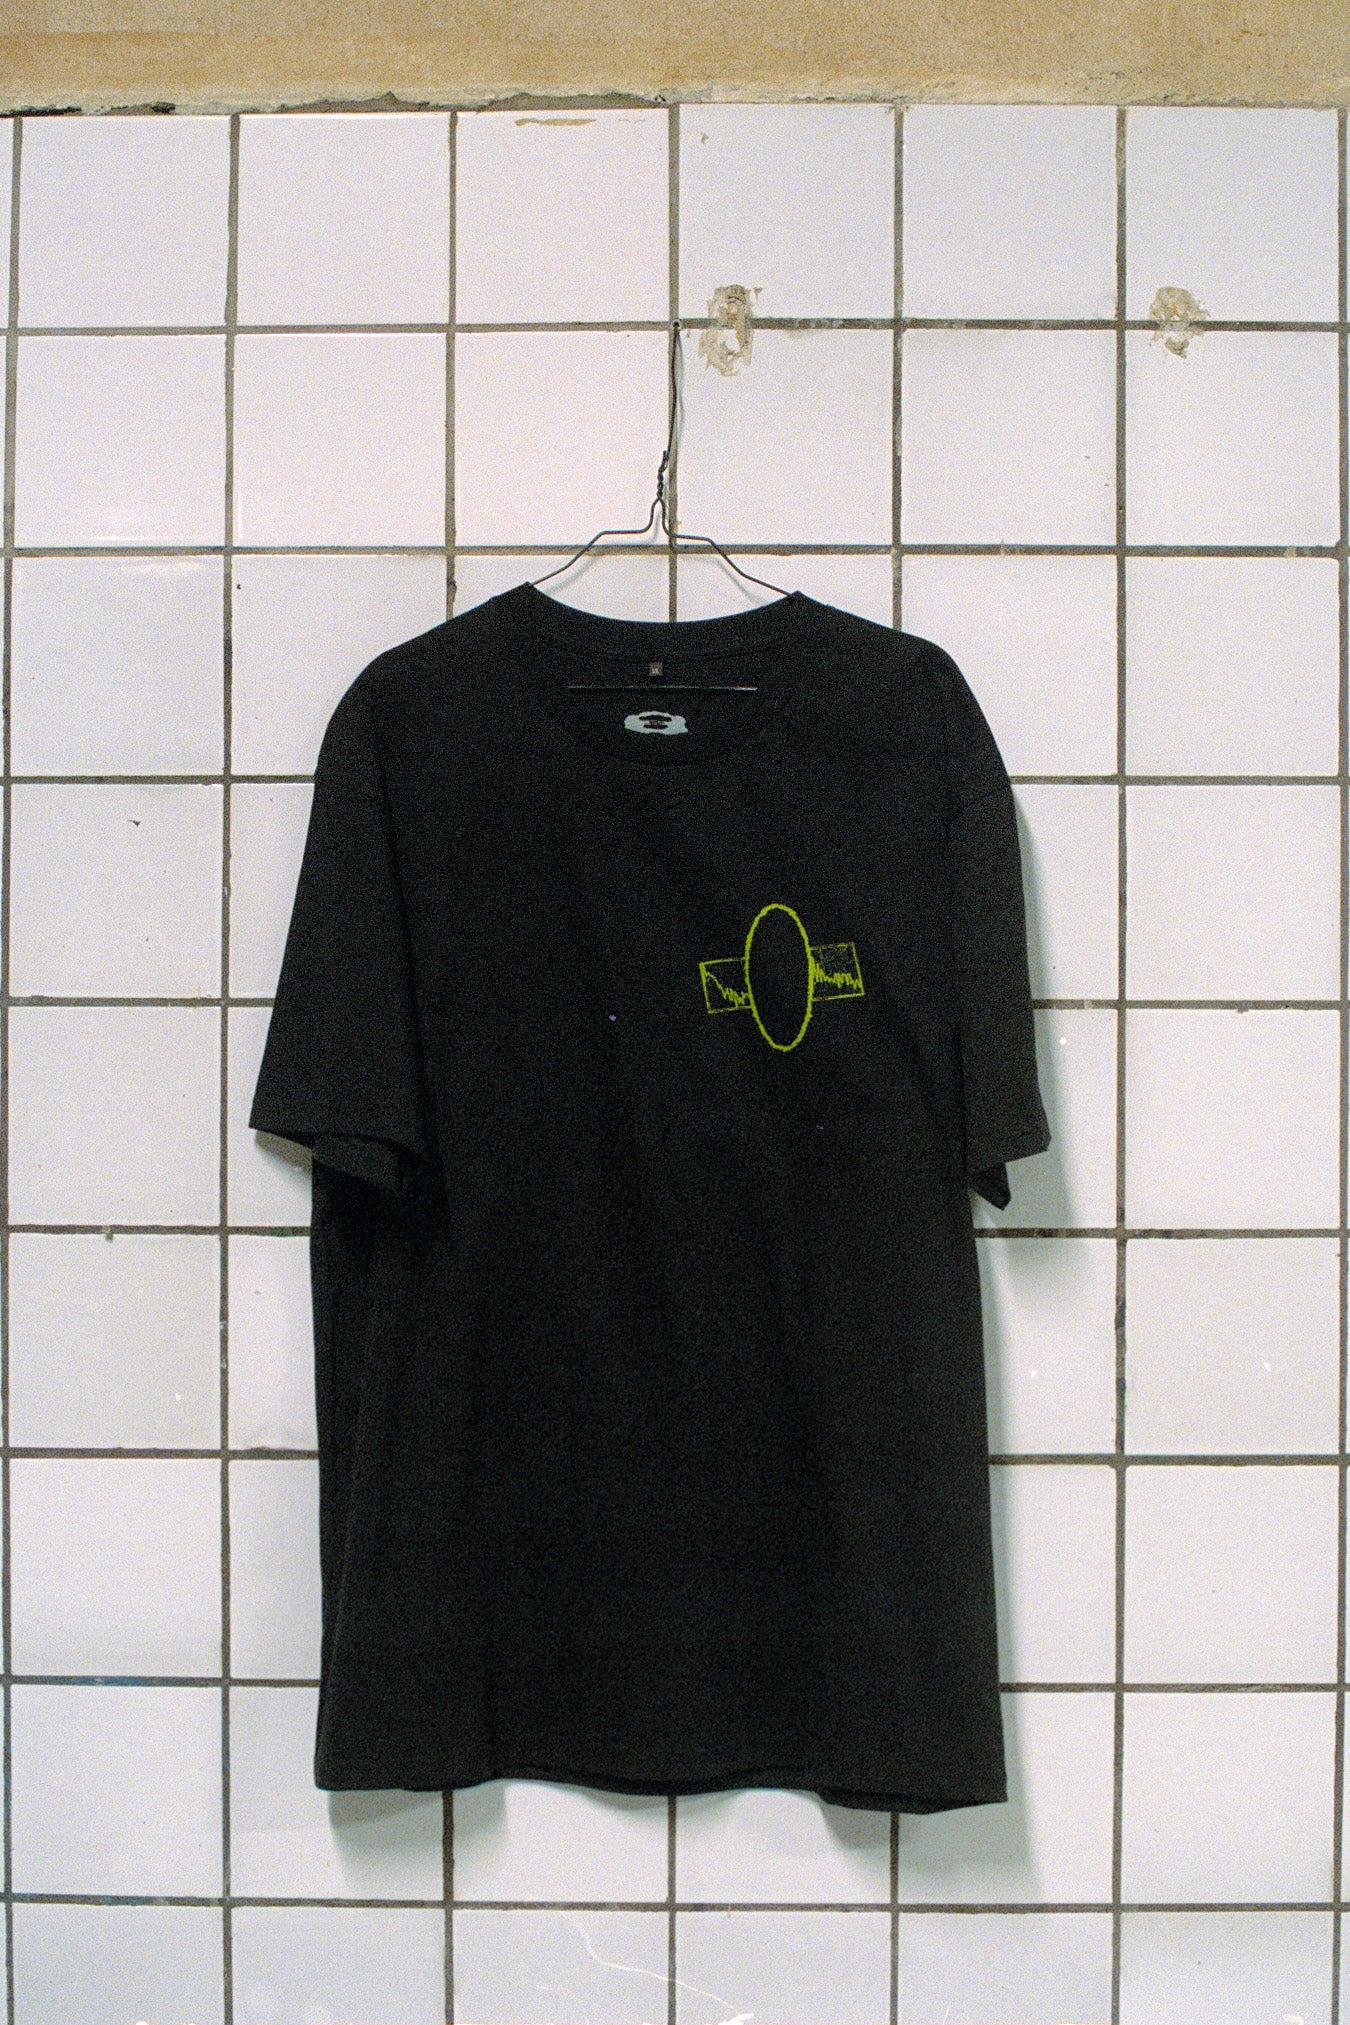 The PAM X Berlin Atonal 23 TEE  available online with global shipping, and in PAM Stores Melbourne and Sydney.